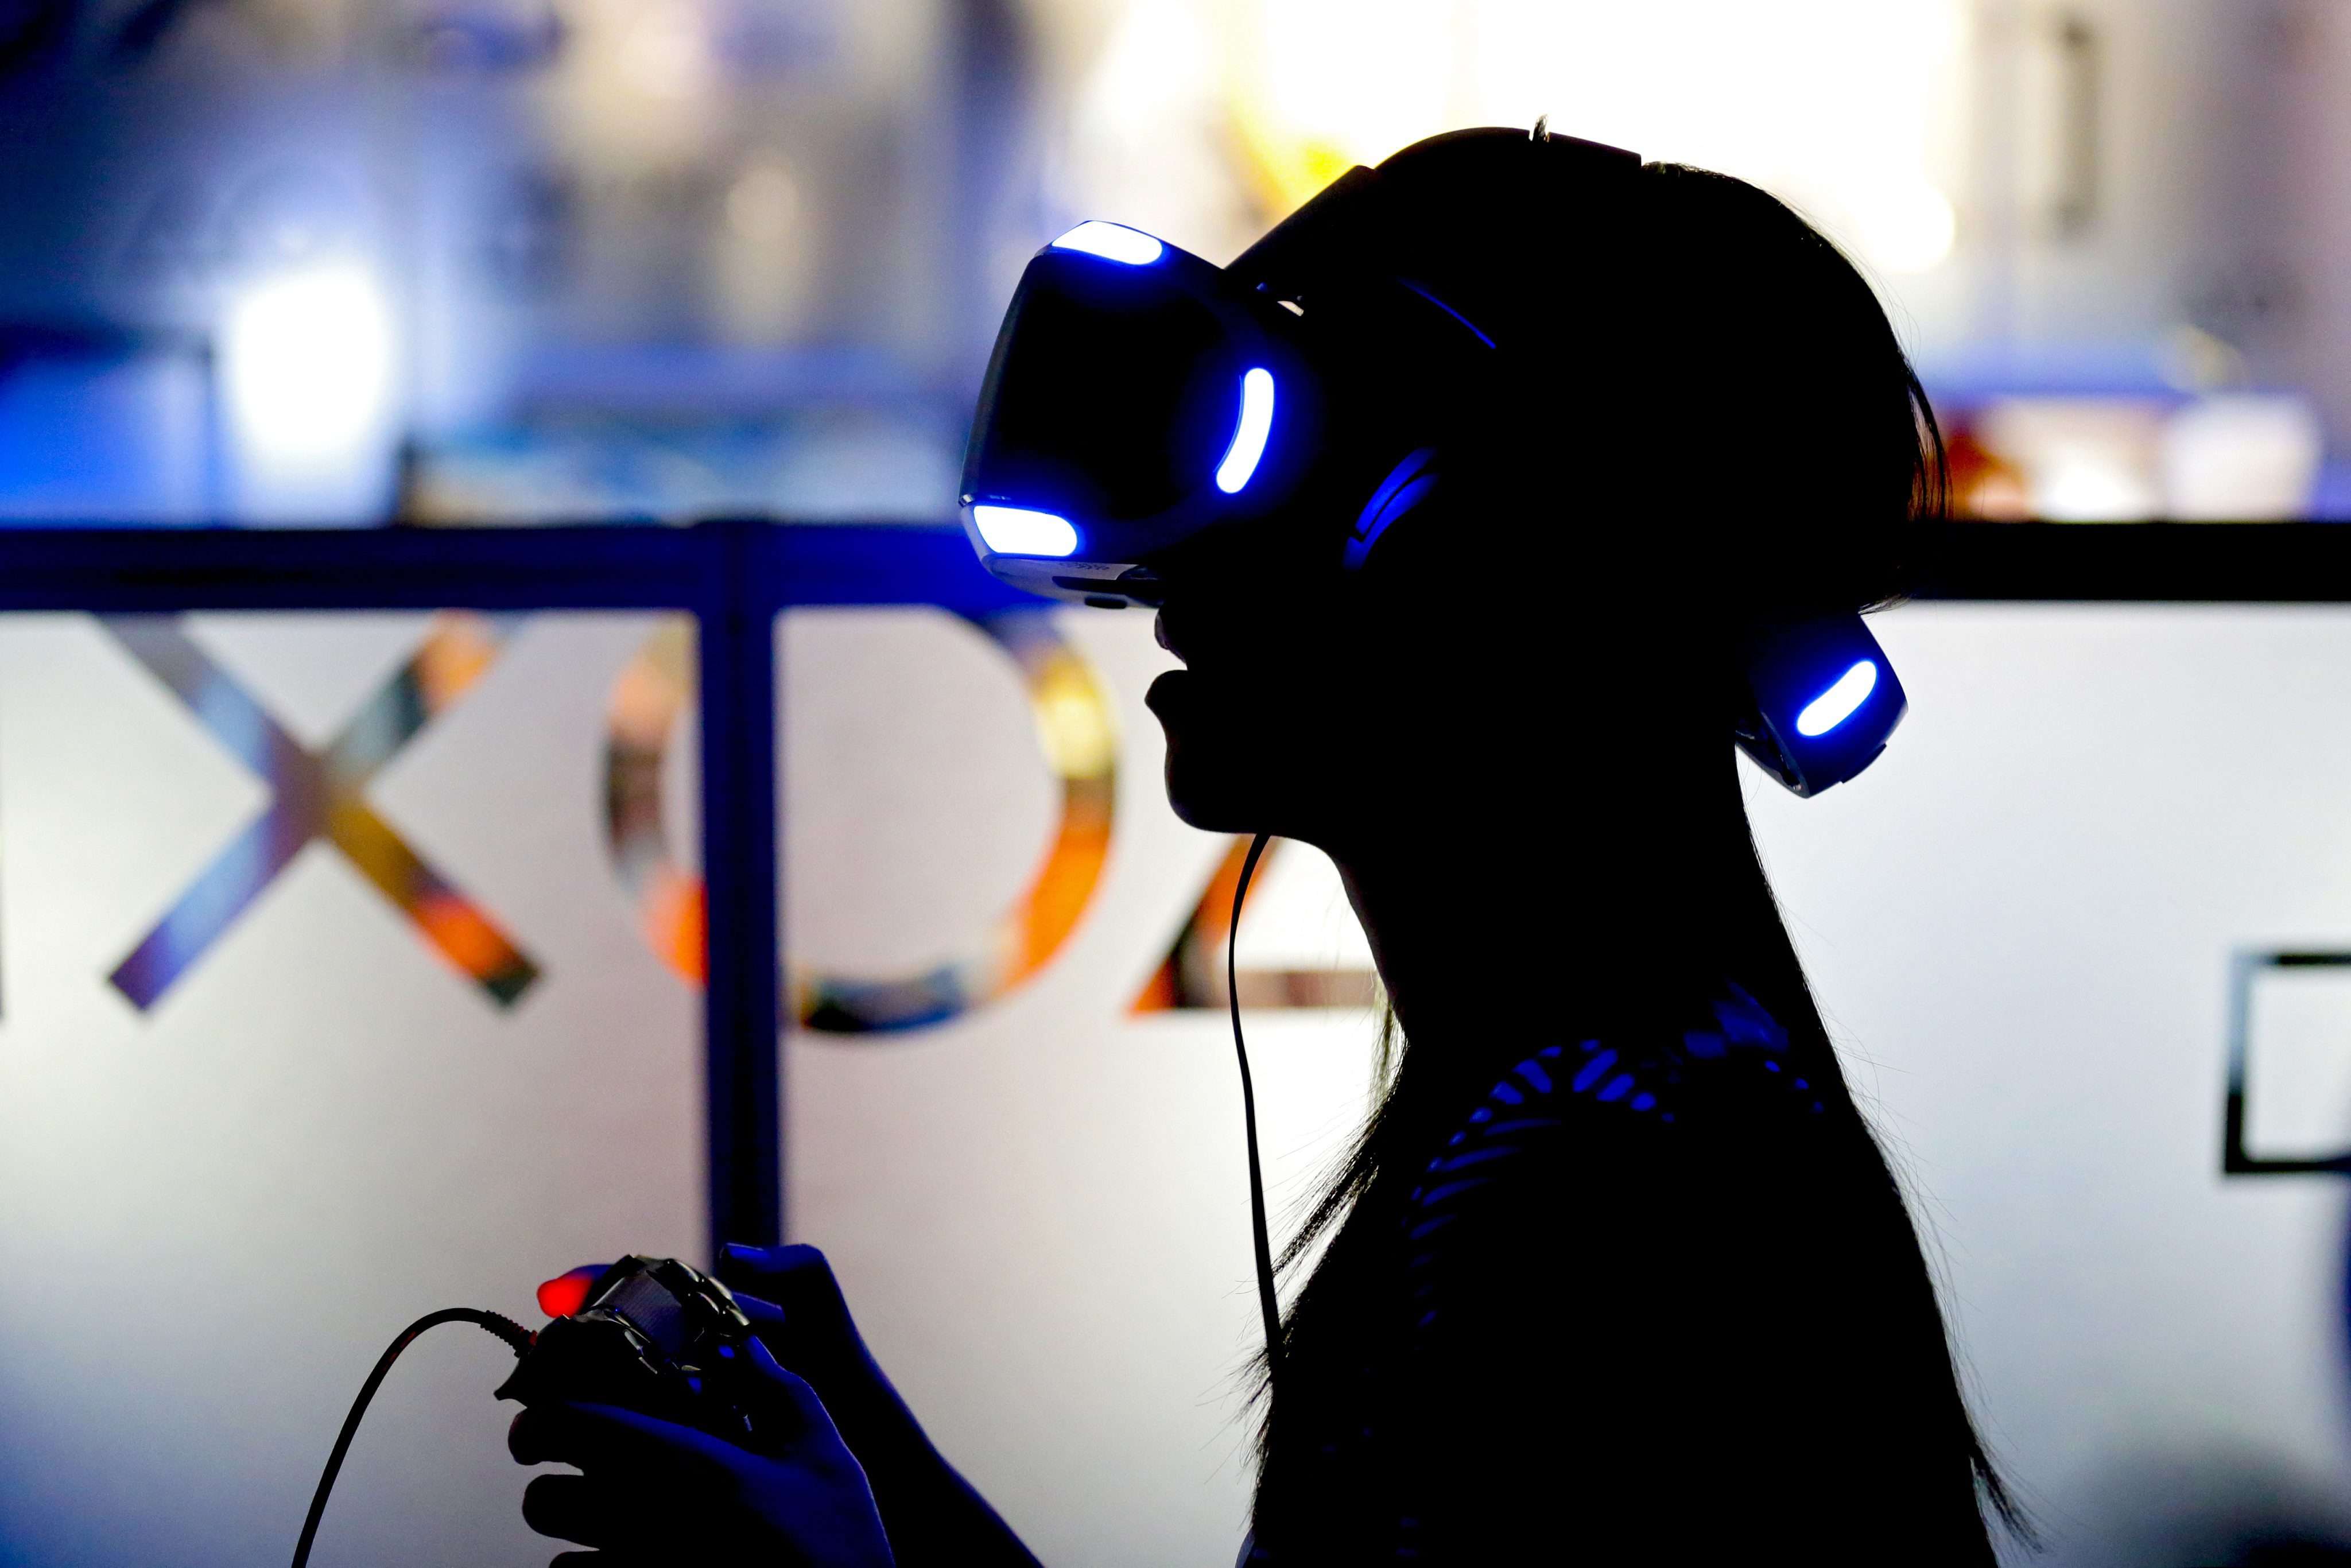 A gamer wears a Virtual Reality (VR) game console during the 2016 Taipei game show in Taiwan. Photo EPA, Ritchie B. Tongo